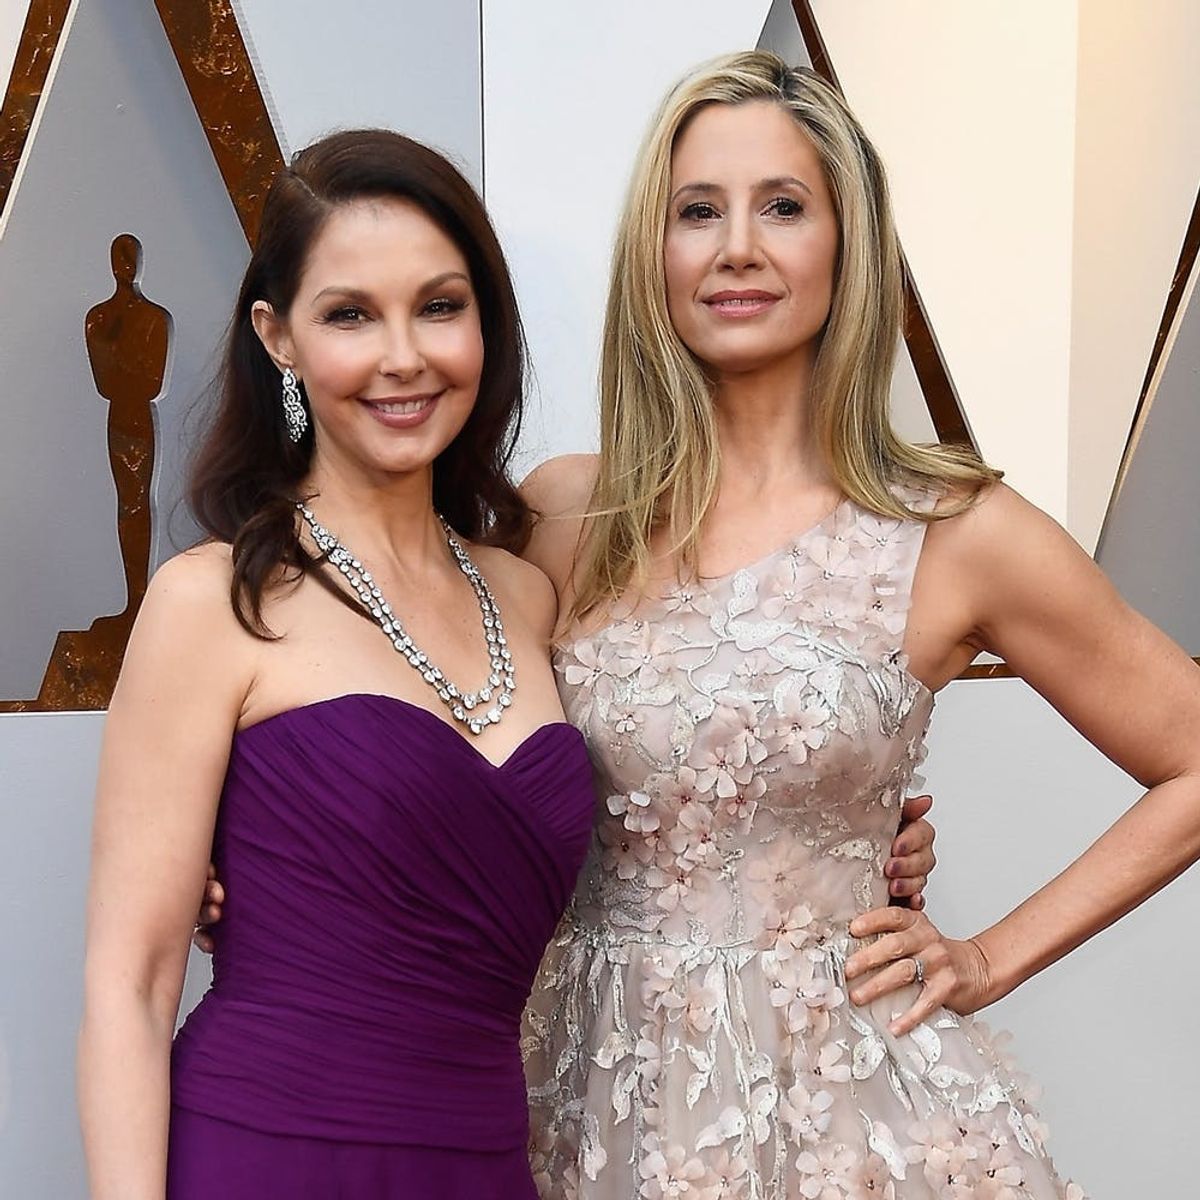 Oscars 2018: Ashley Judd and Mira Sorvino Walk the Red Carpet Together for Time’s Up